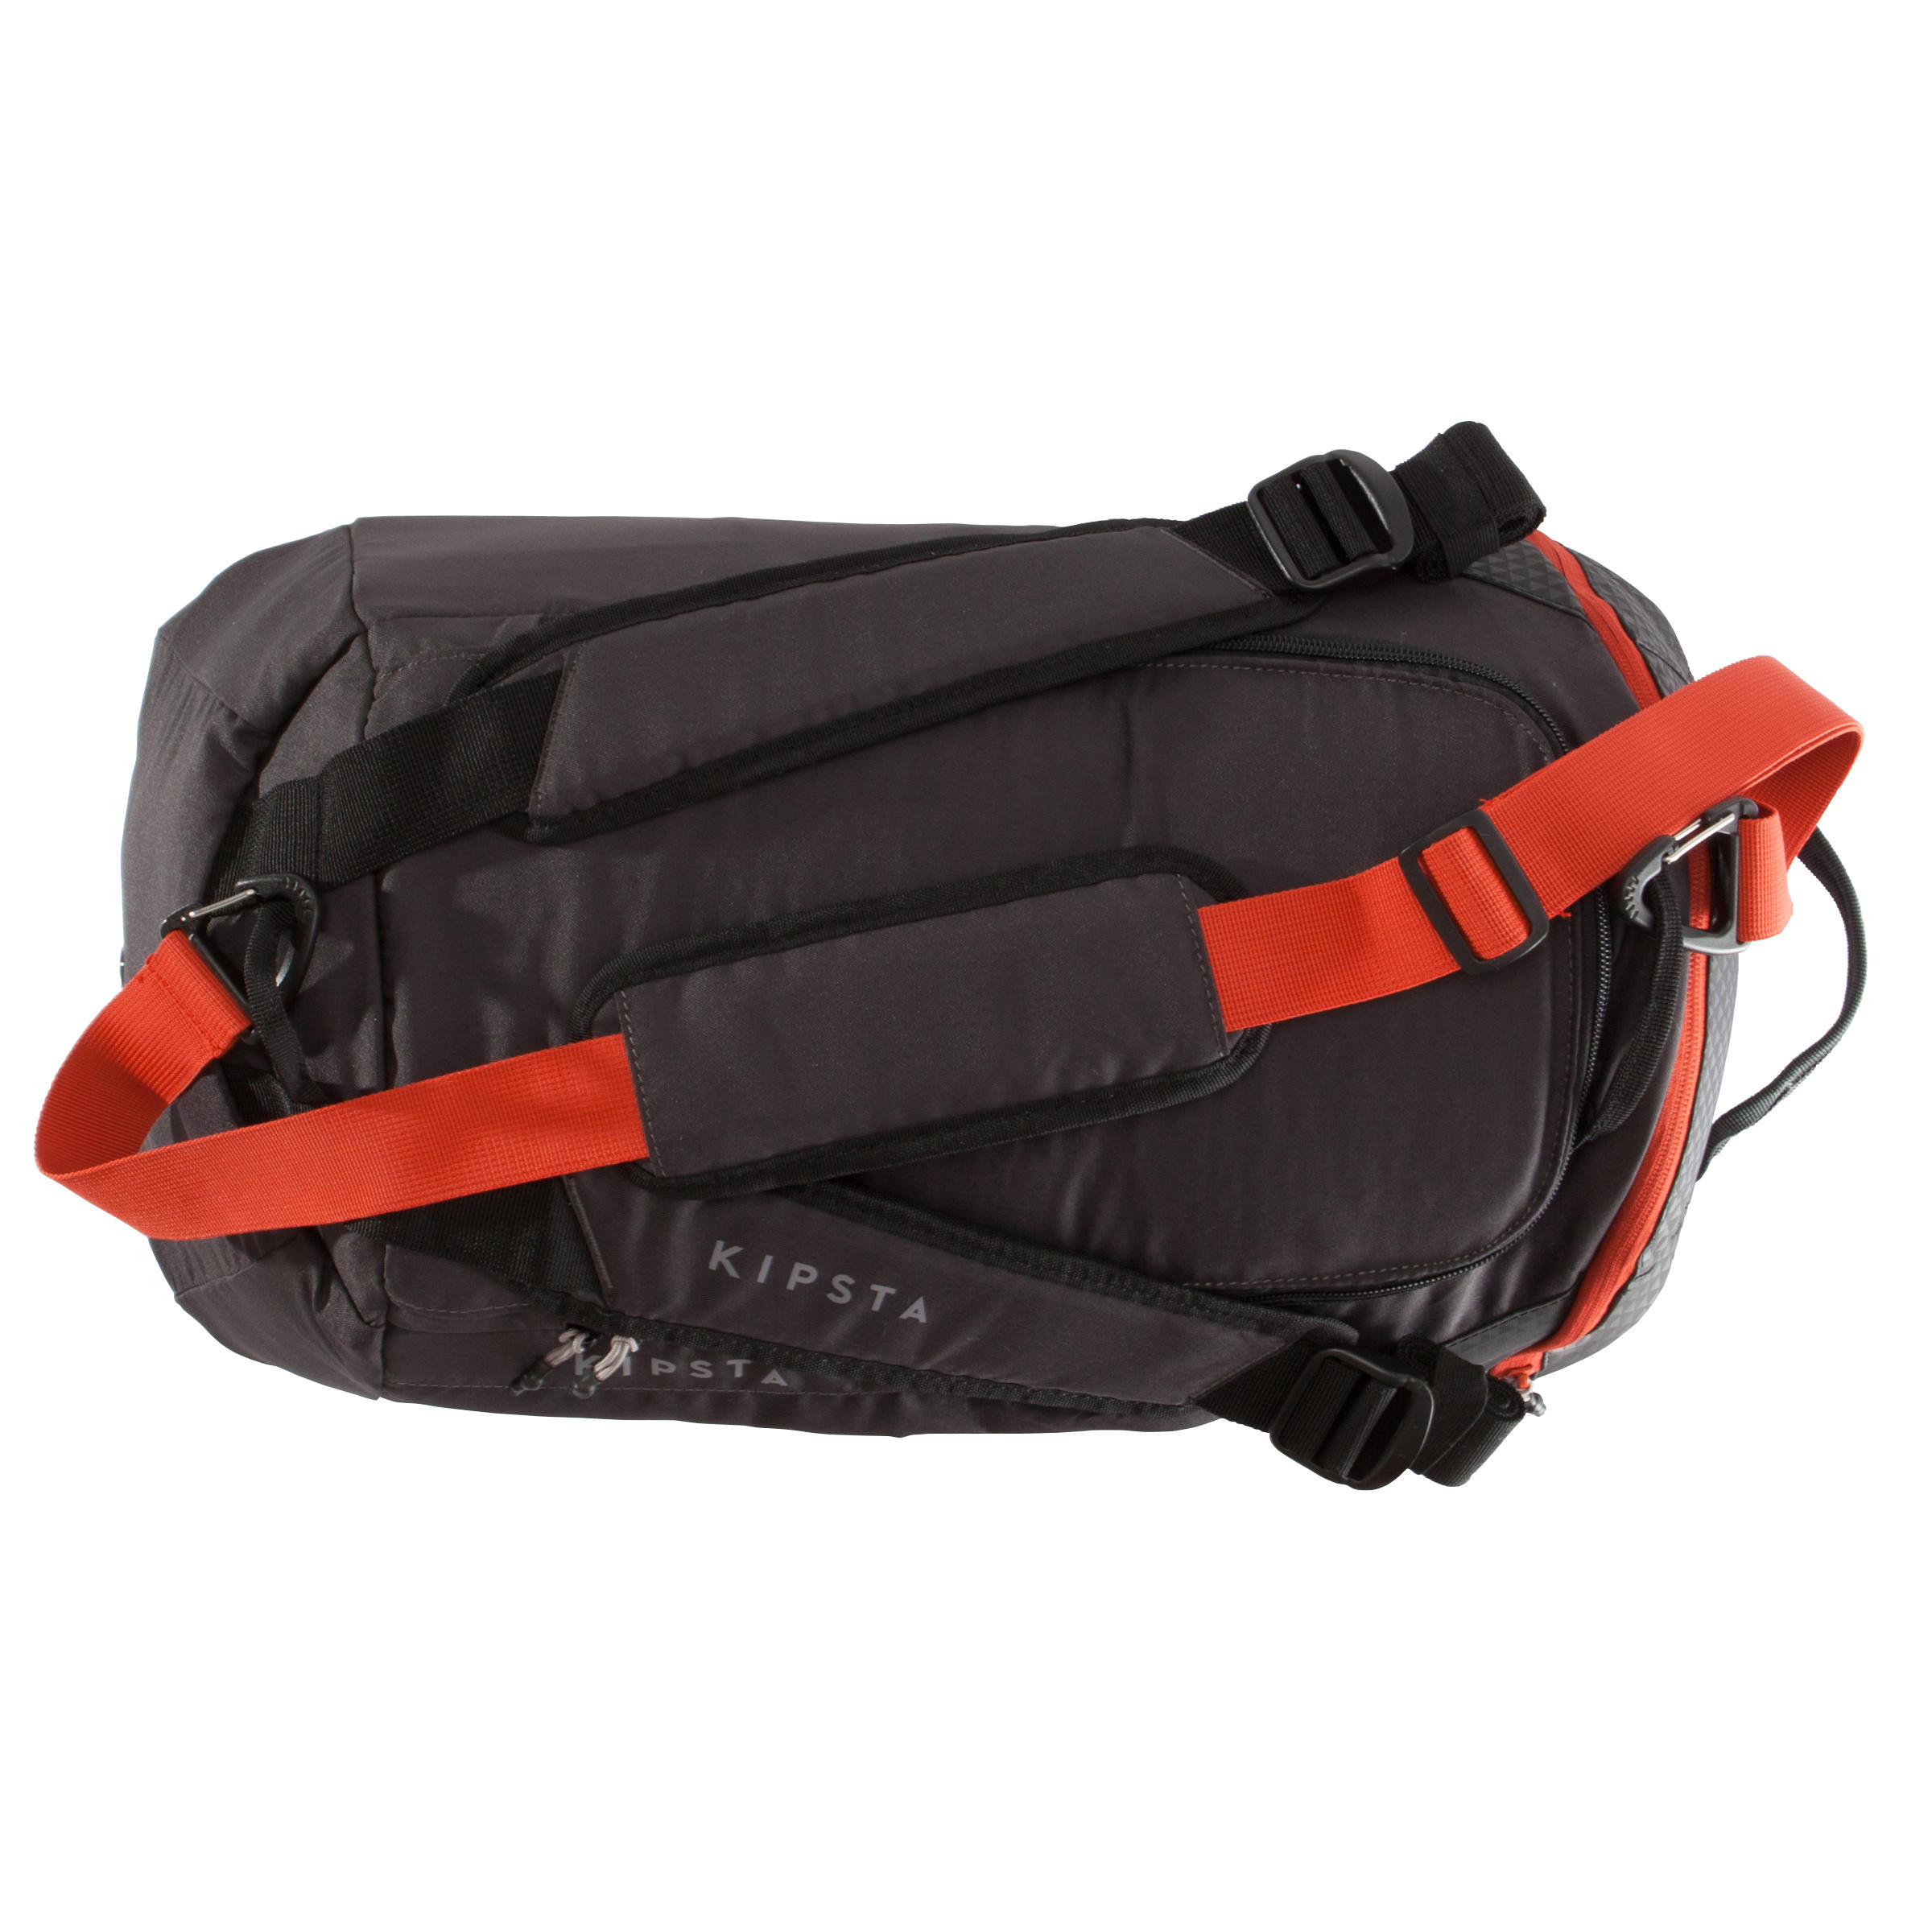 Away Sports Bag 30 Litres - Black/Grey/Red